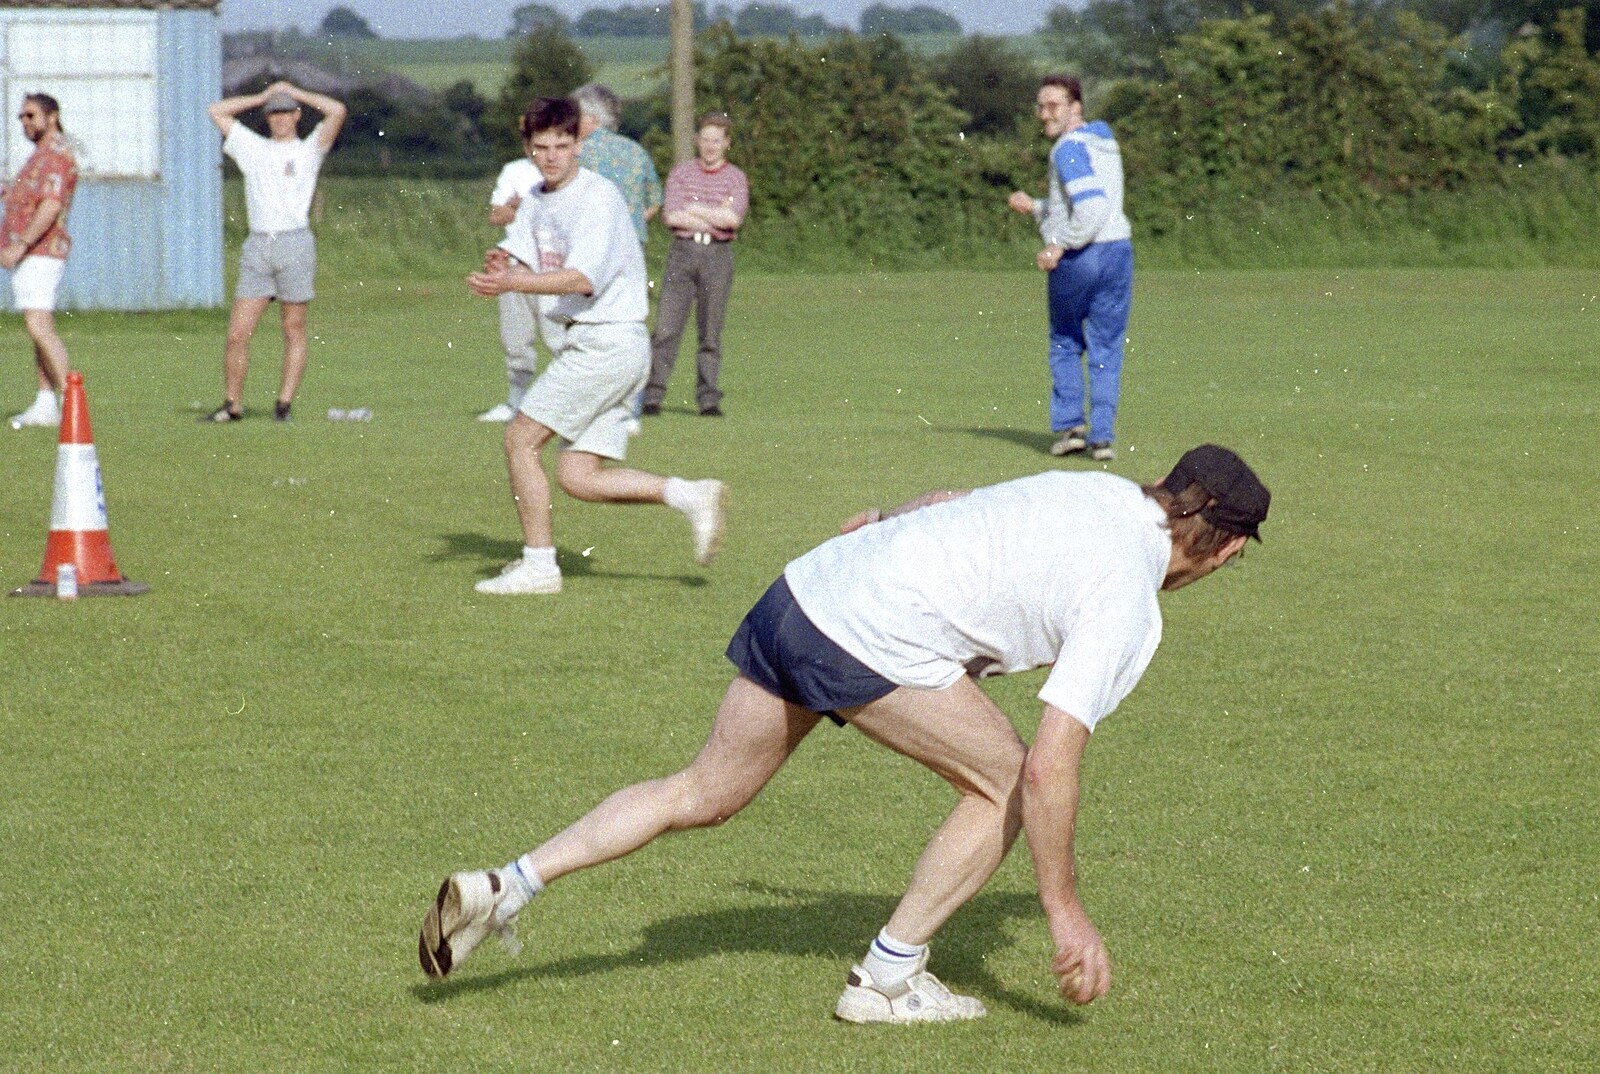 Clays Softball and Printec Reunion, Ditchingham and Stoke Ash, Suffolk - 2nd June 1994: A bit of fielding action